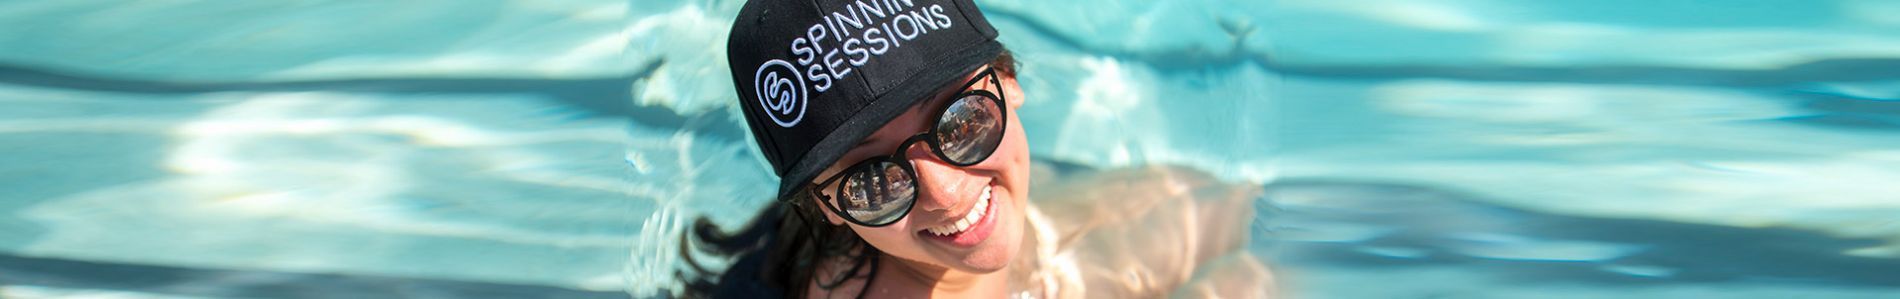 Free Spinnin' Sessions Caps!